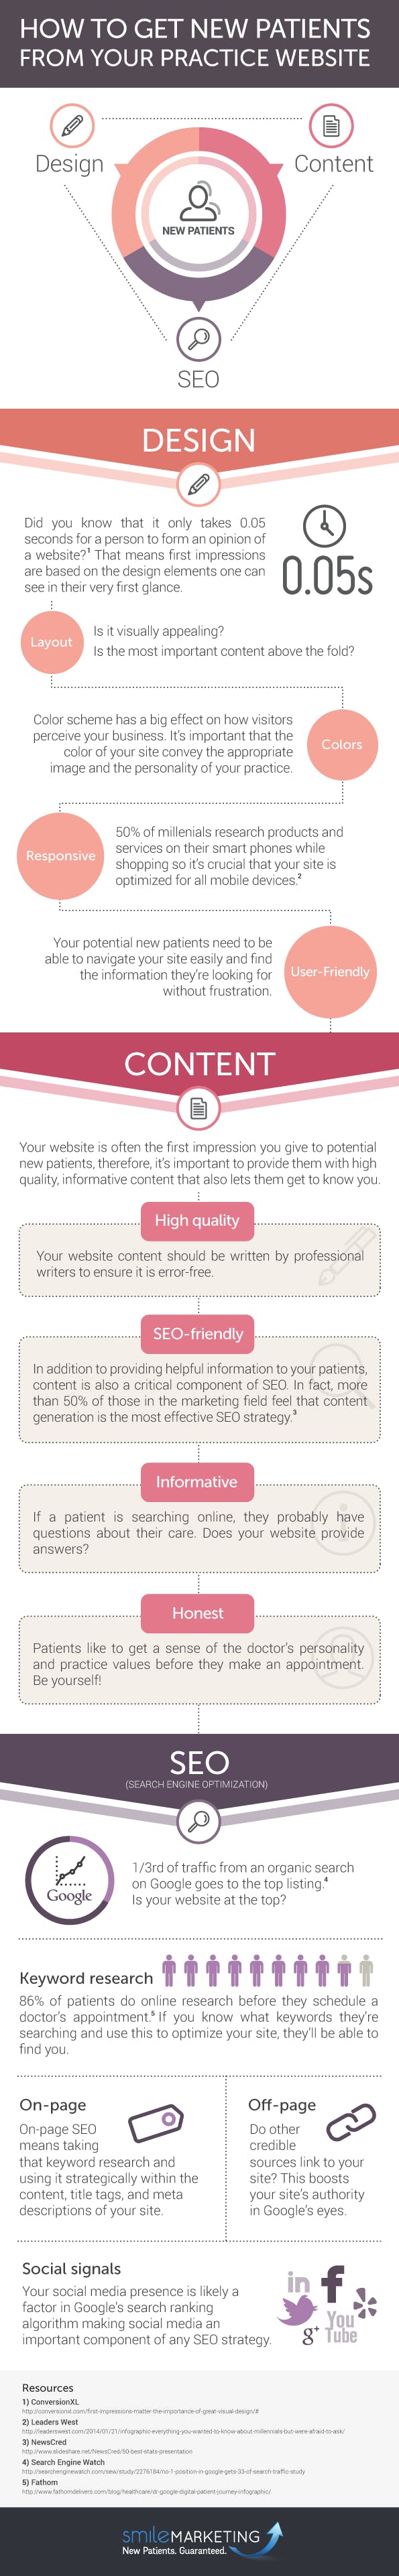 New Dental Patients From Website Infographic